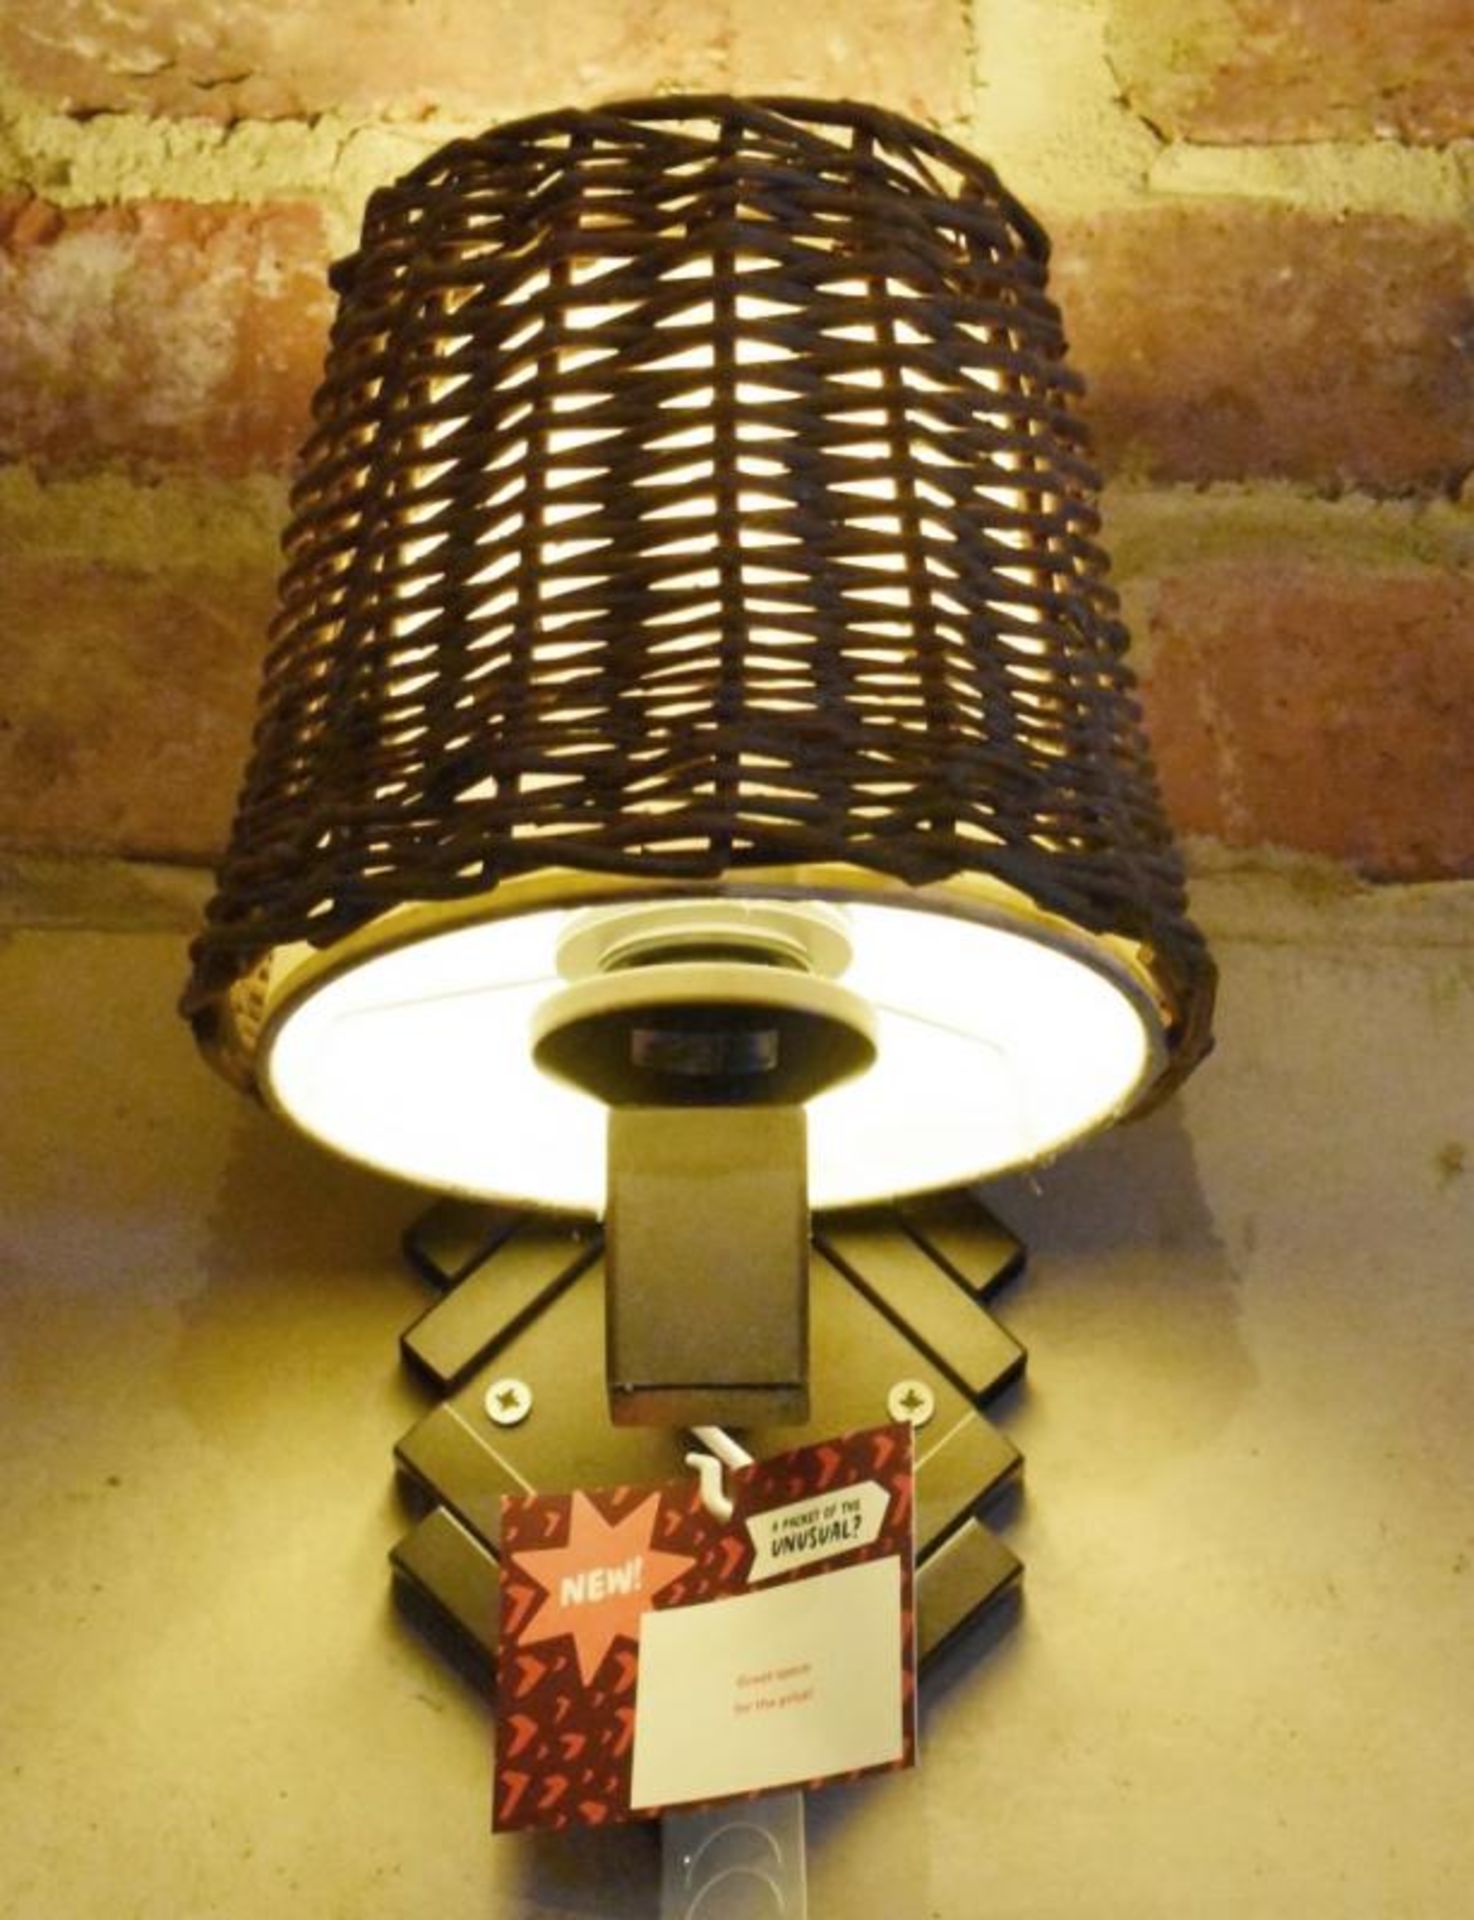 5 x Wall Lights With Rustic Basket Shades - CL461 - Location: Altrincham WA14 - Image 2 of 2